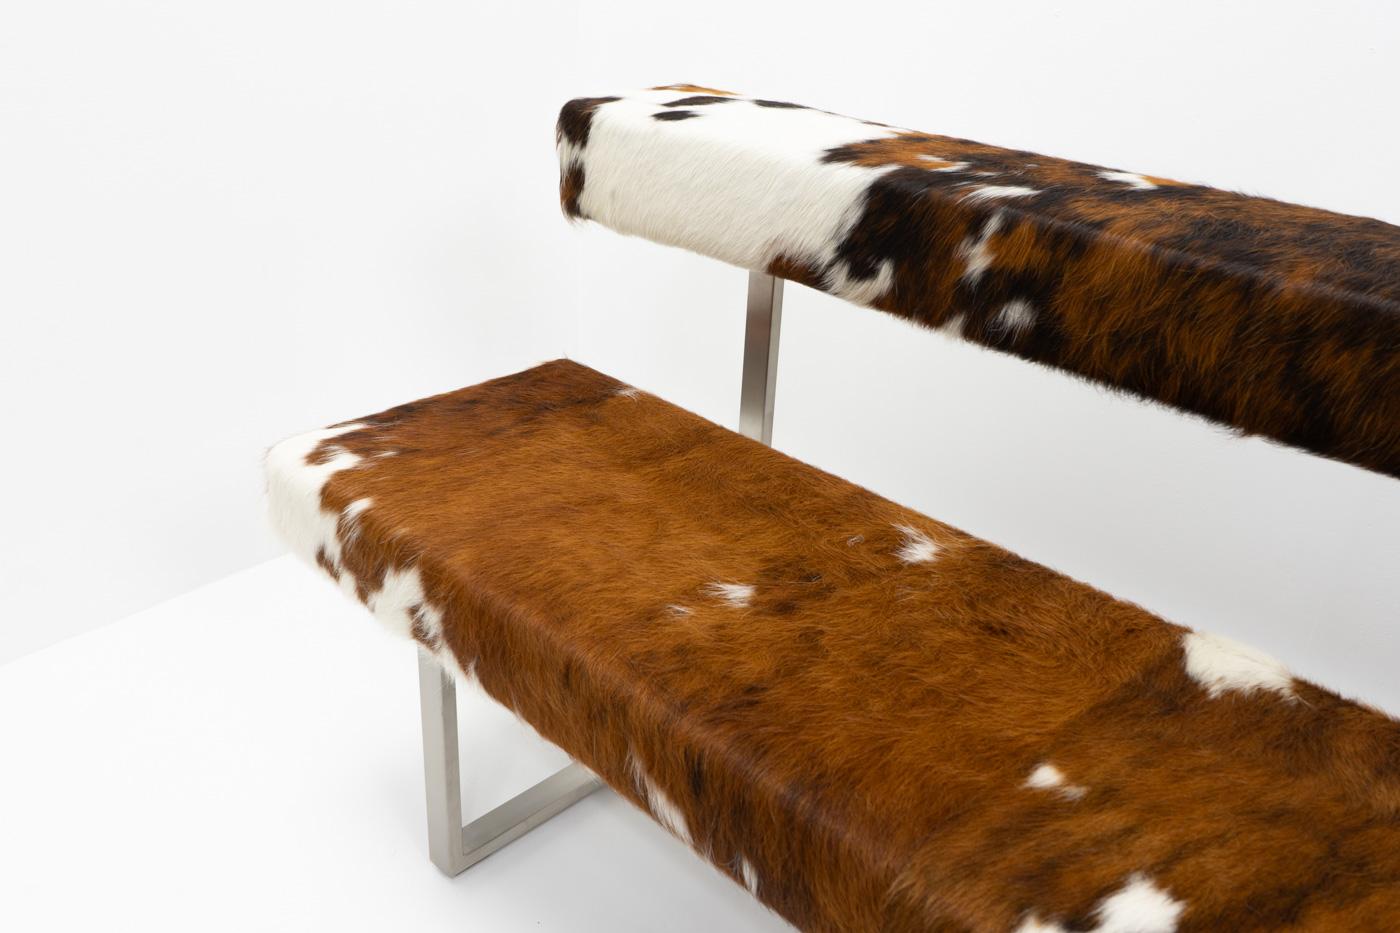 Swiss Design Permesso Bench in cowhide, by Girsberger - 2000s For Sale 3